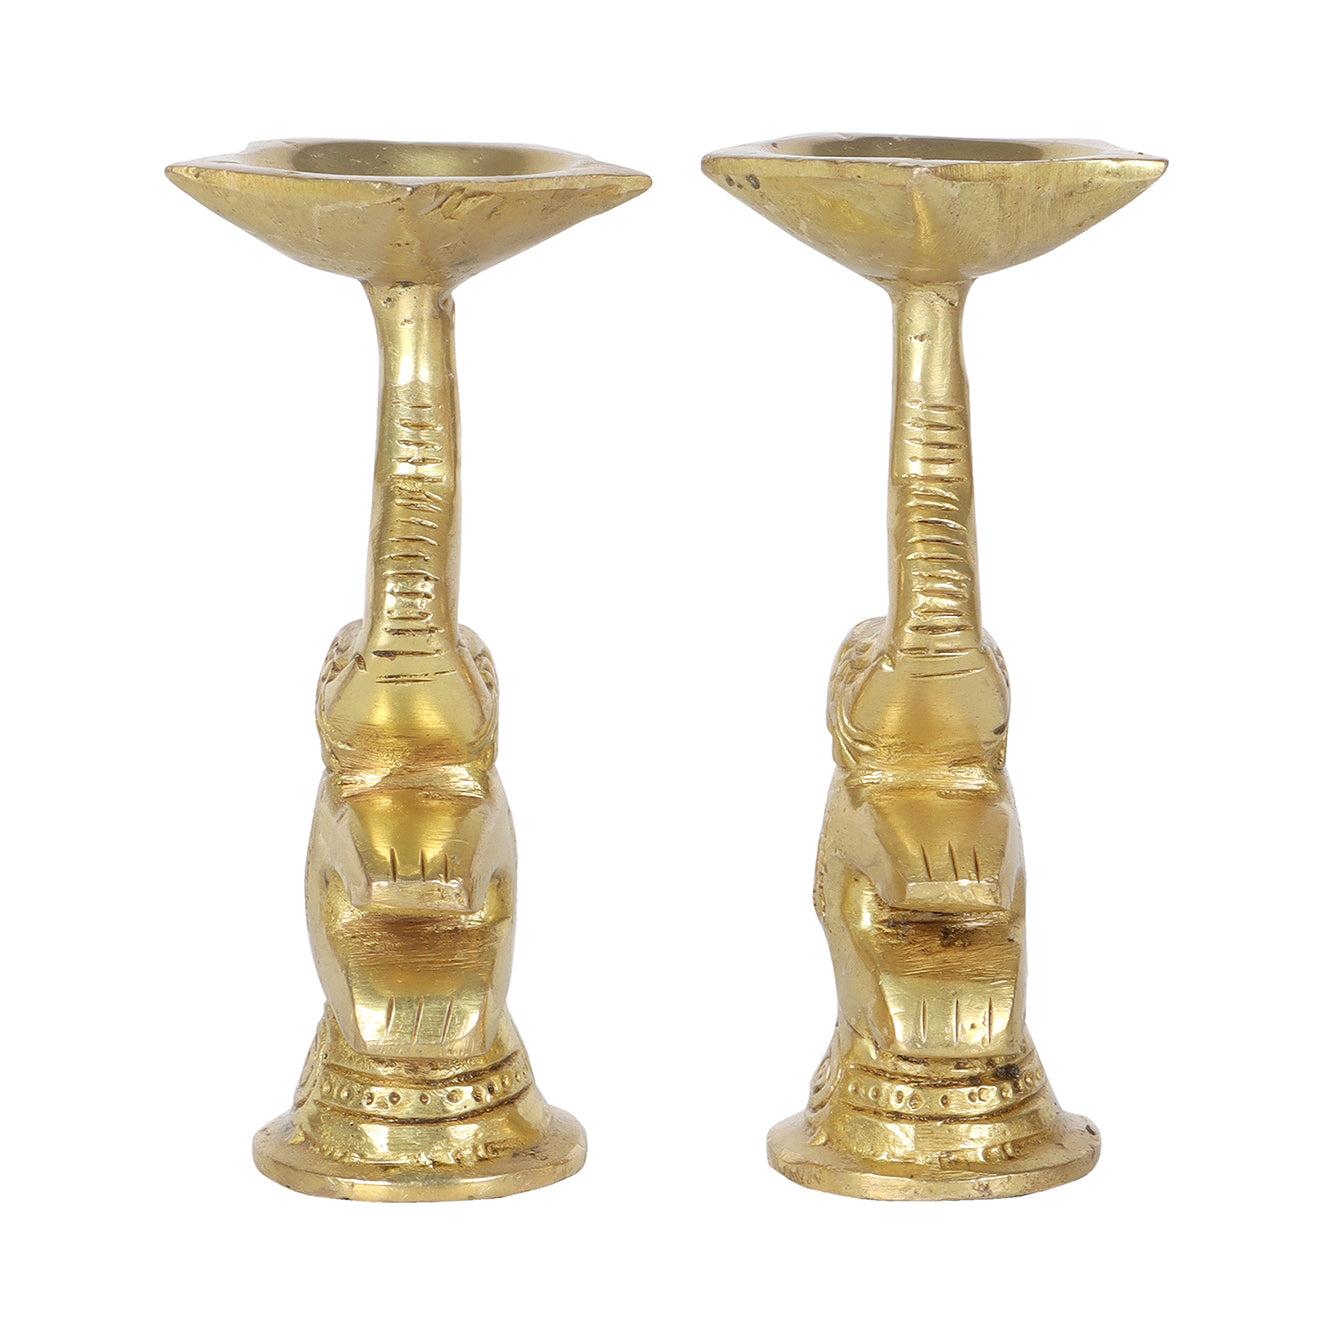 Brass 4 Inches Diya Pair Over Elephant Trunk , Brass Decorative Oil Lamps